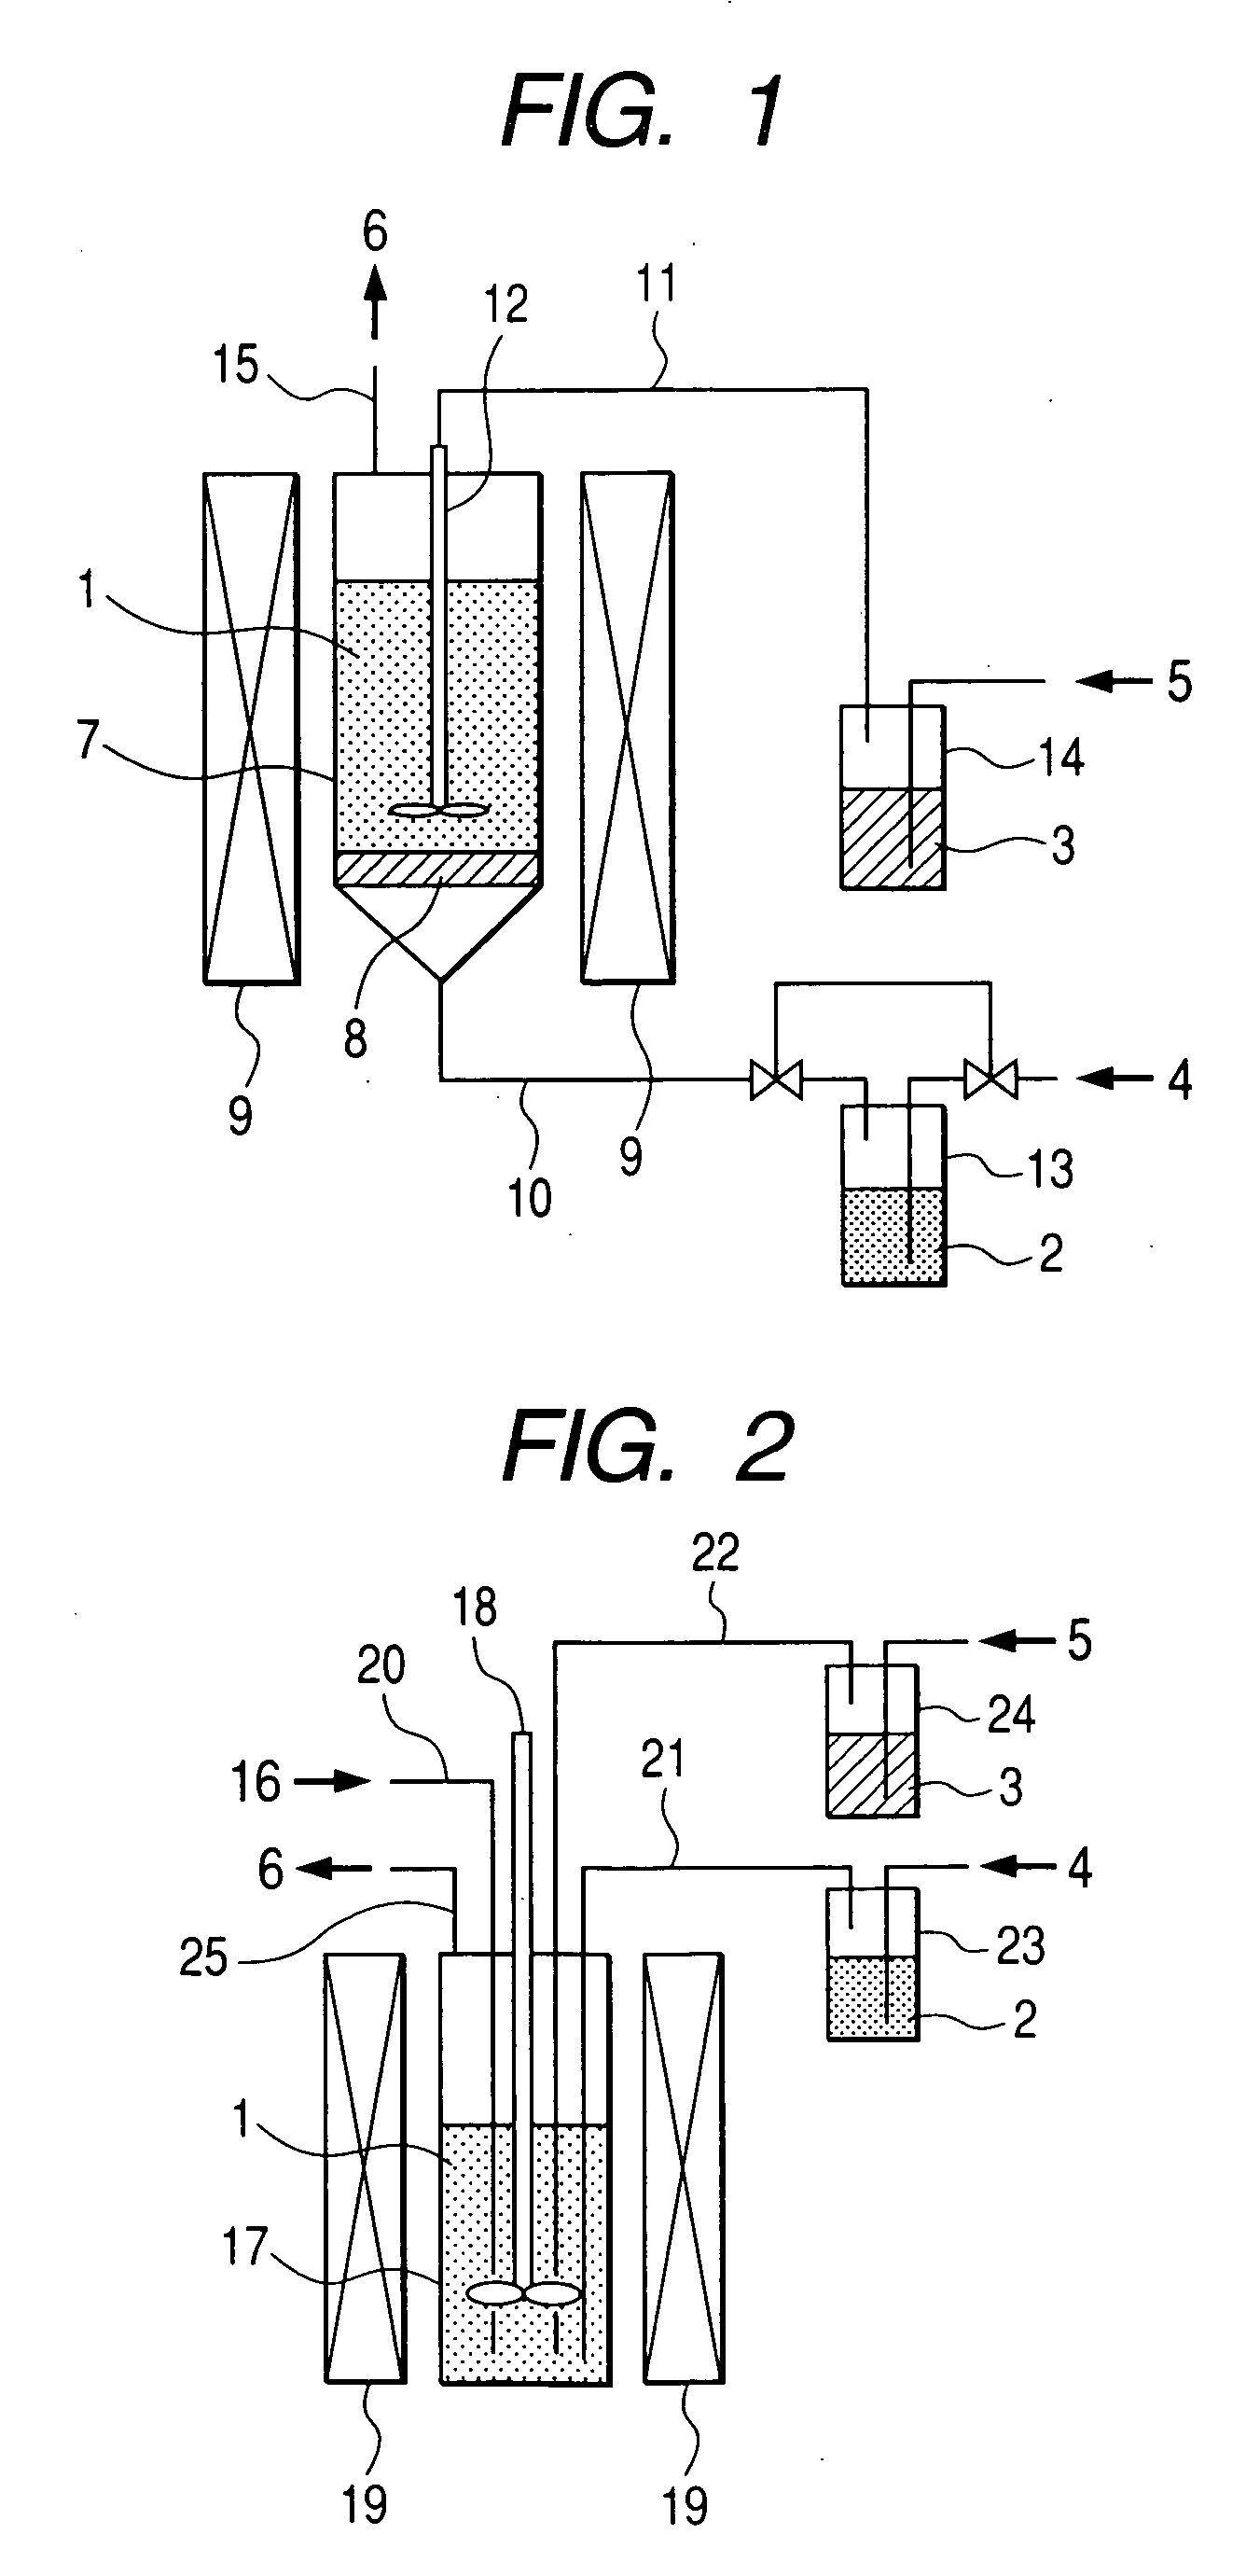 Electroluminescent phosphor, method for producing the same and device containing the same